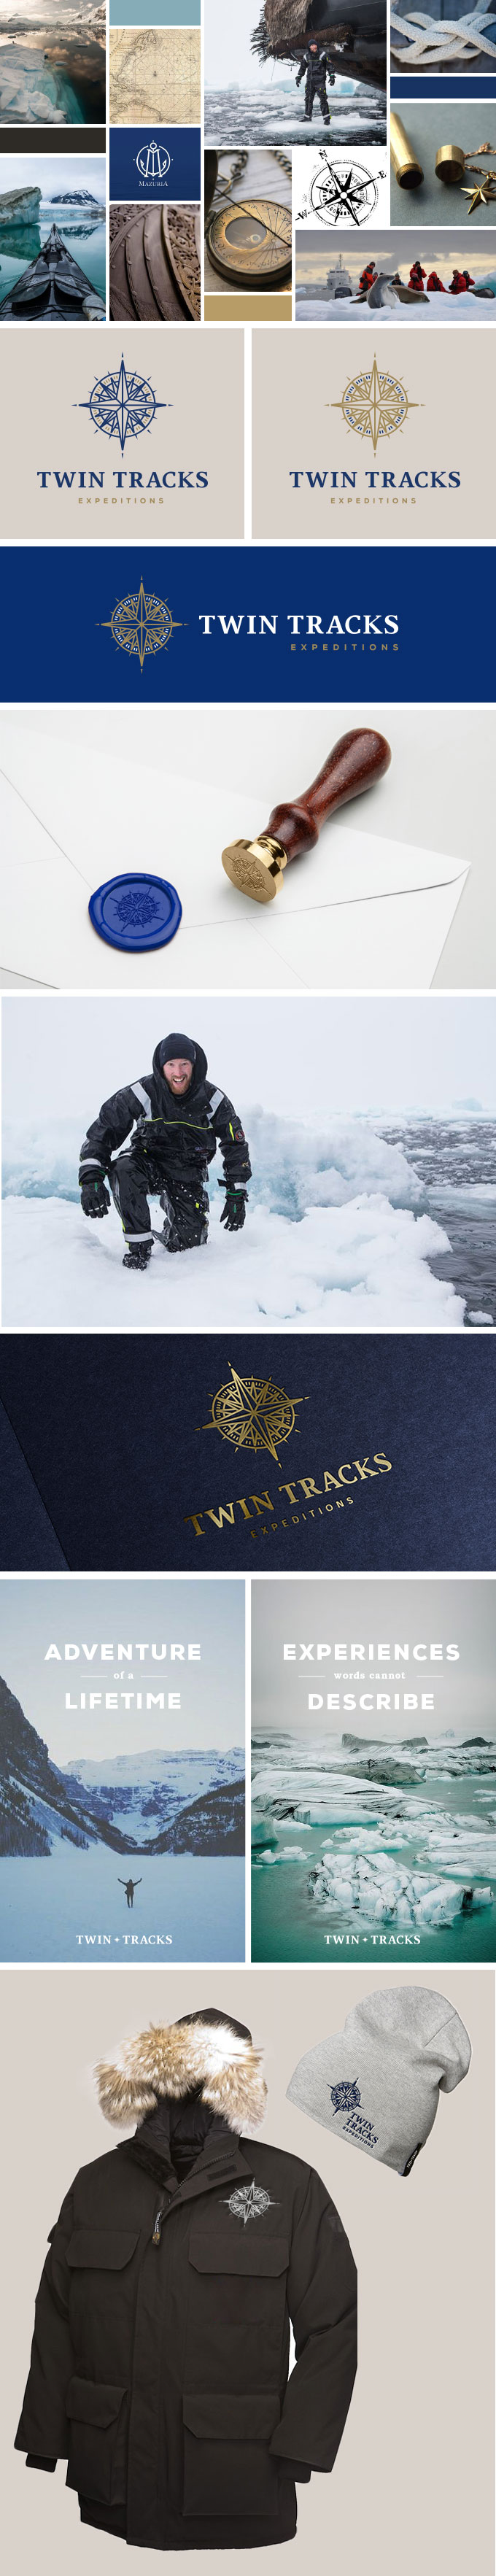 Twin Tracks Expeditions / a little creative